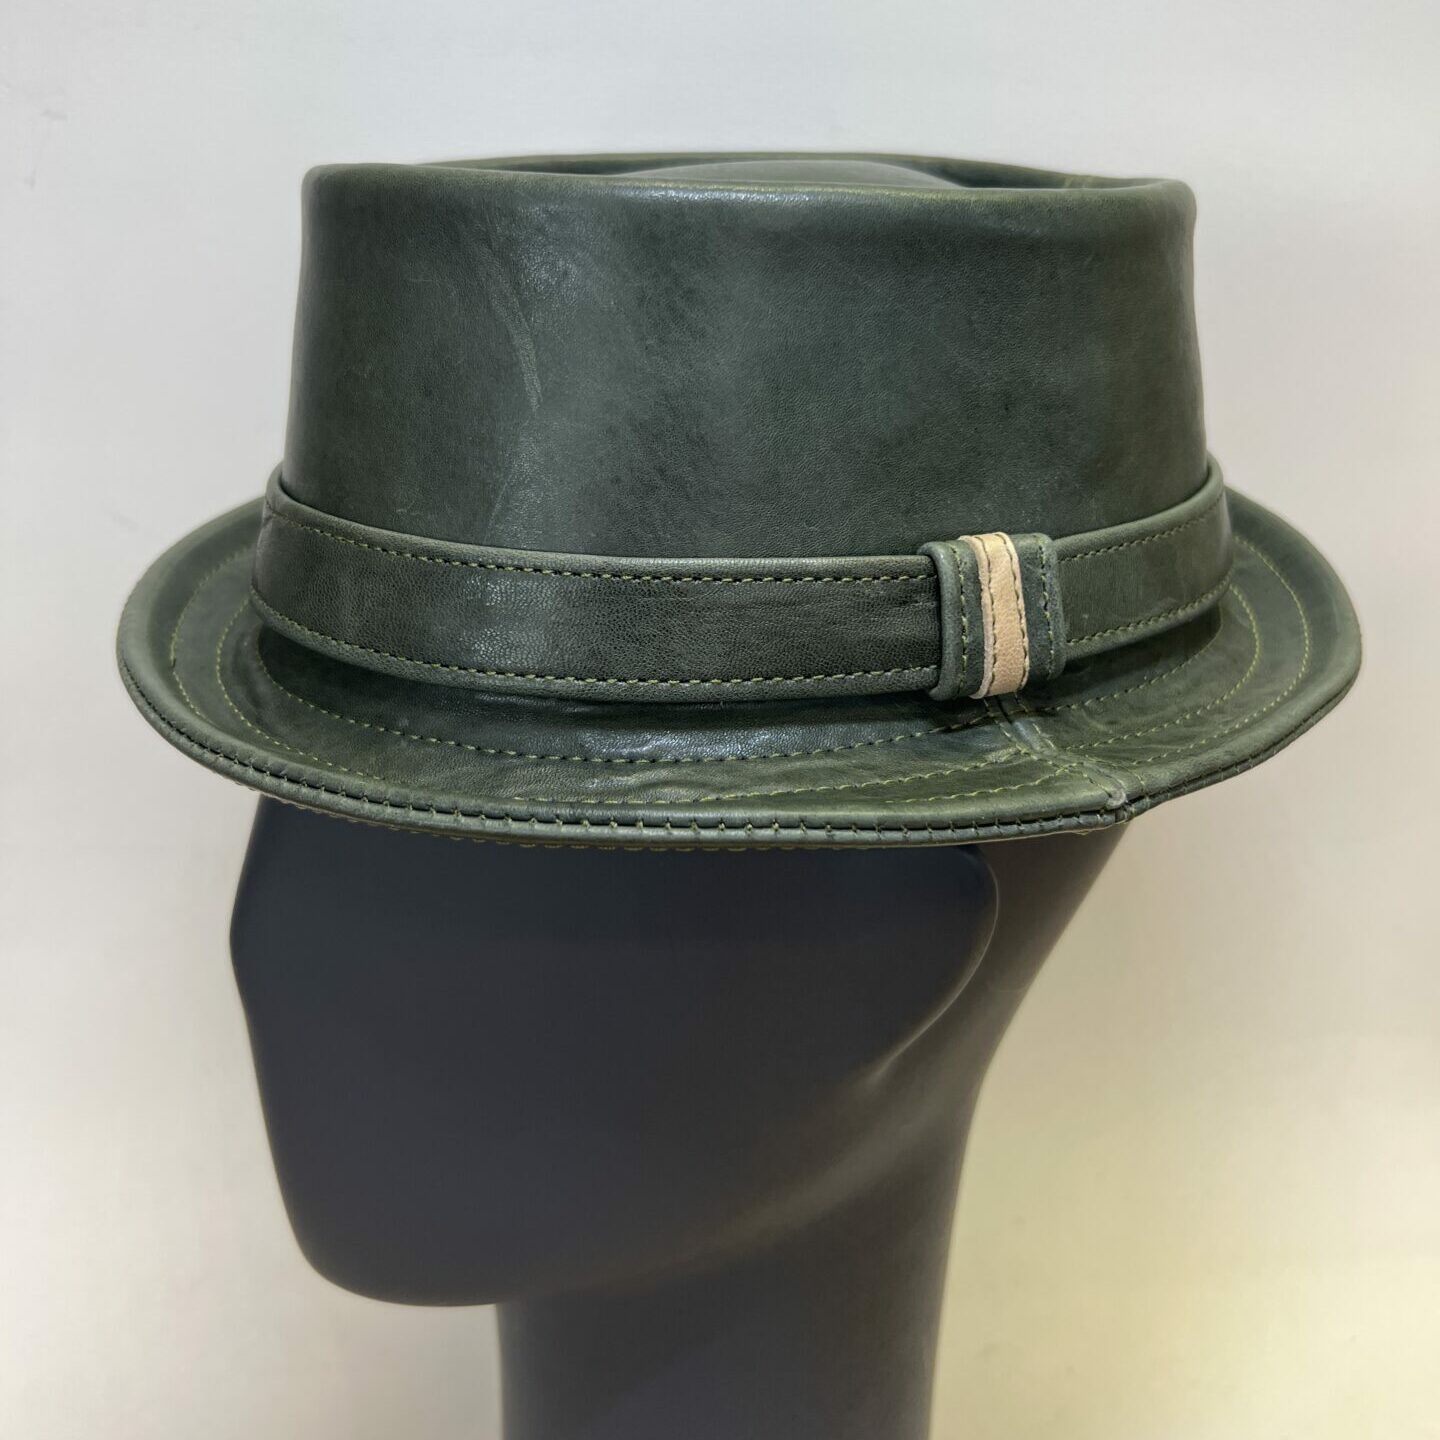 Olive Green Leather Roll Top Pork Pie Hat | The Hattic